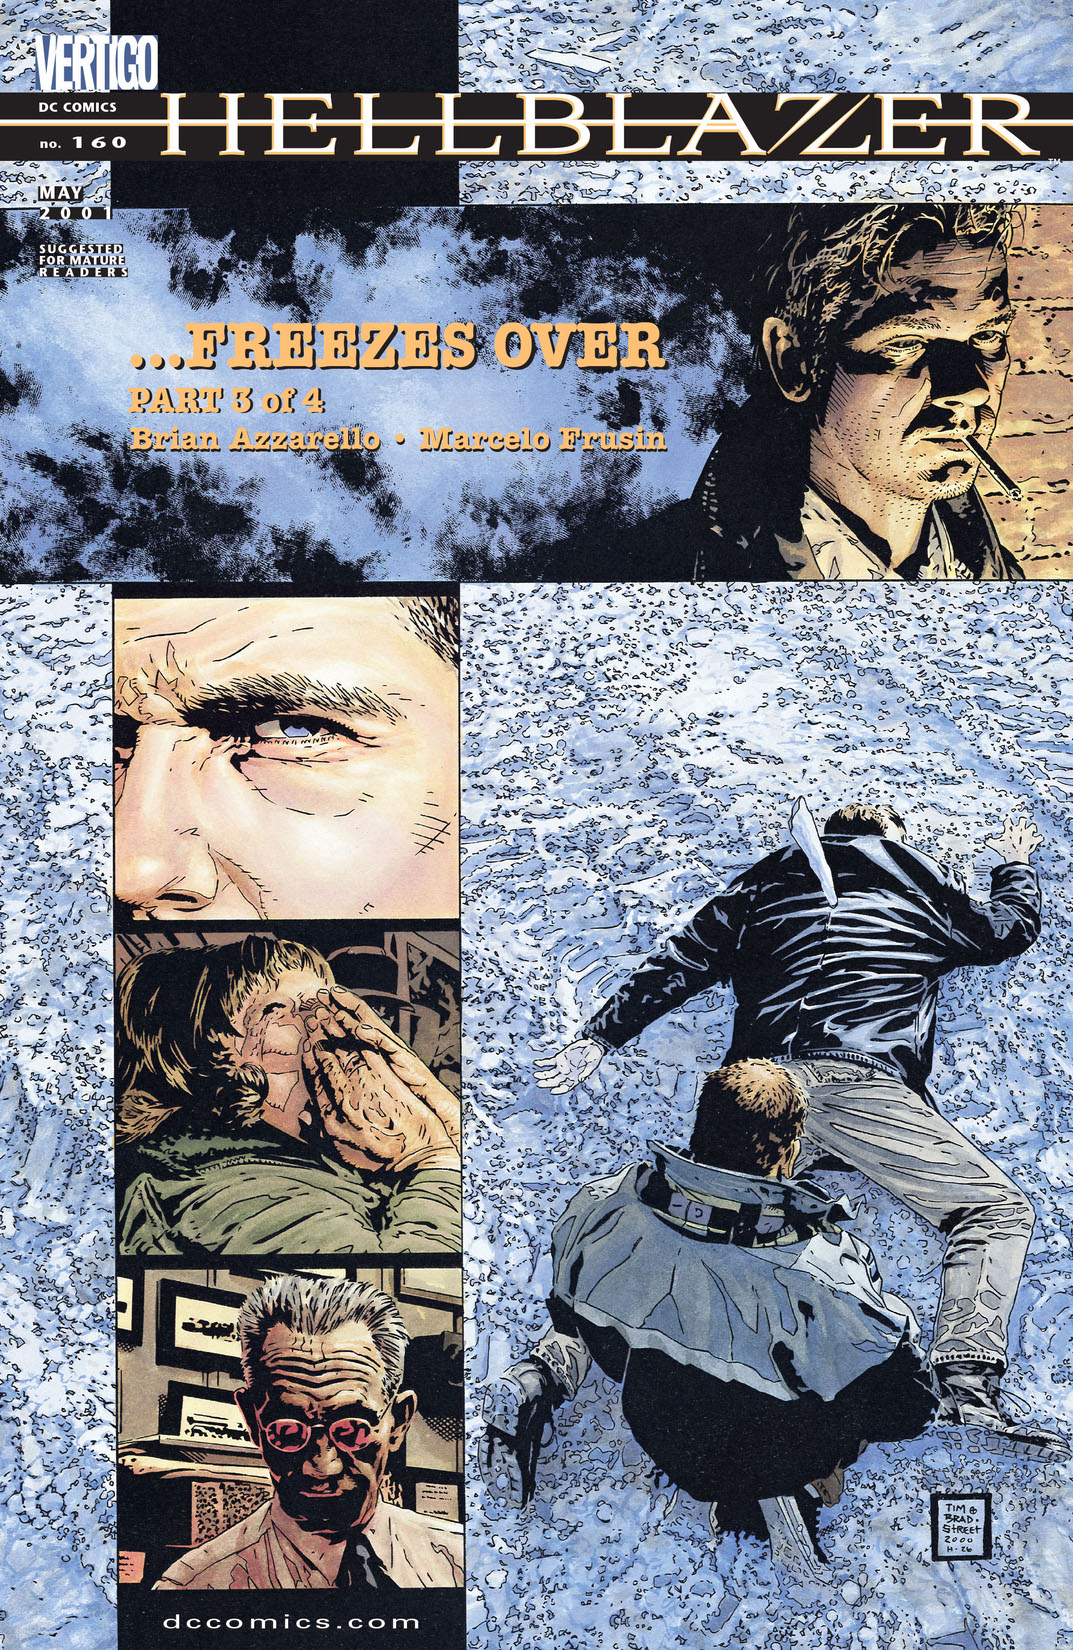 Hellblazer #160 preview images